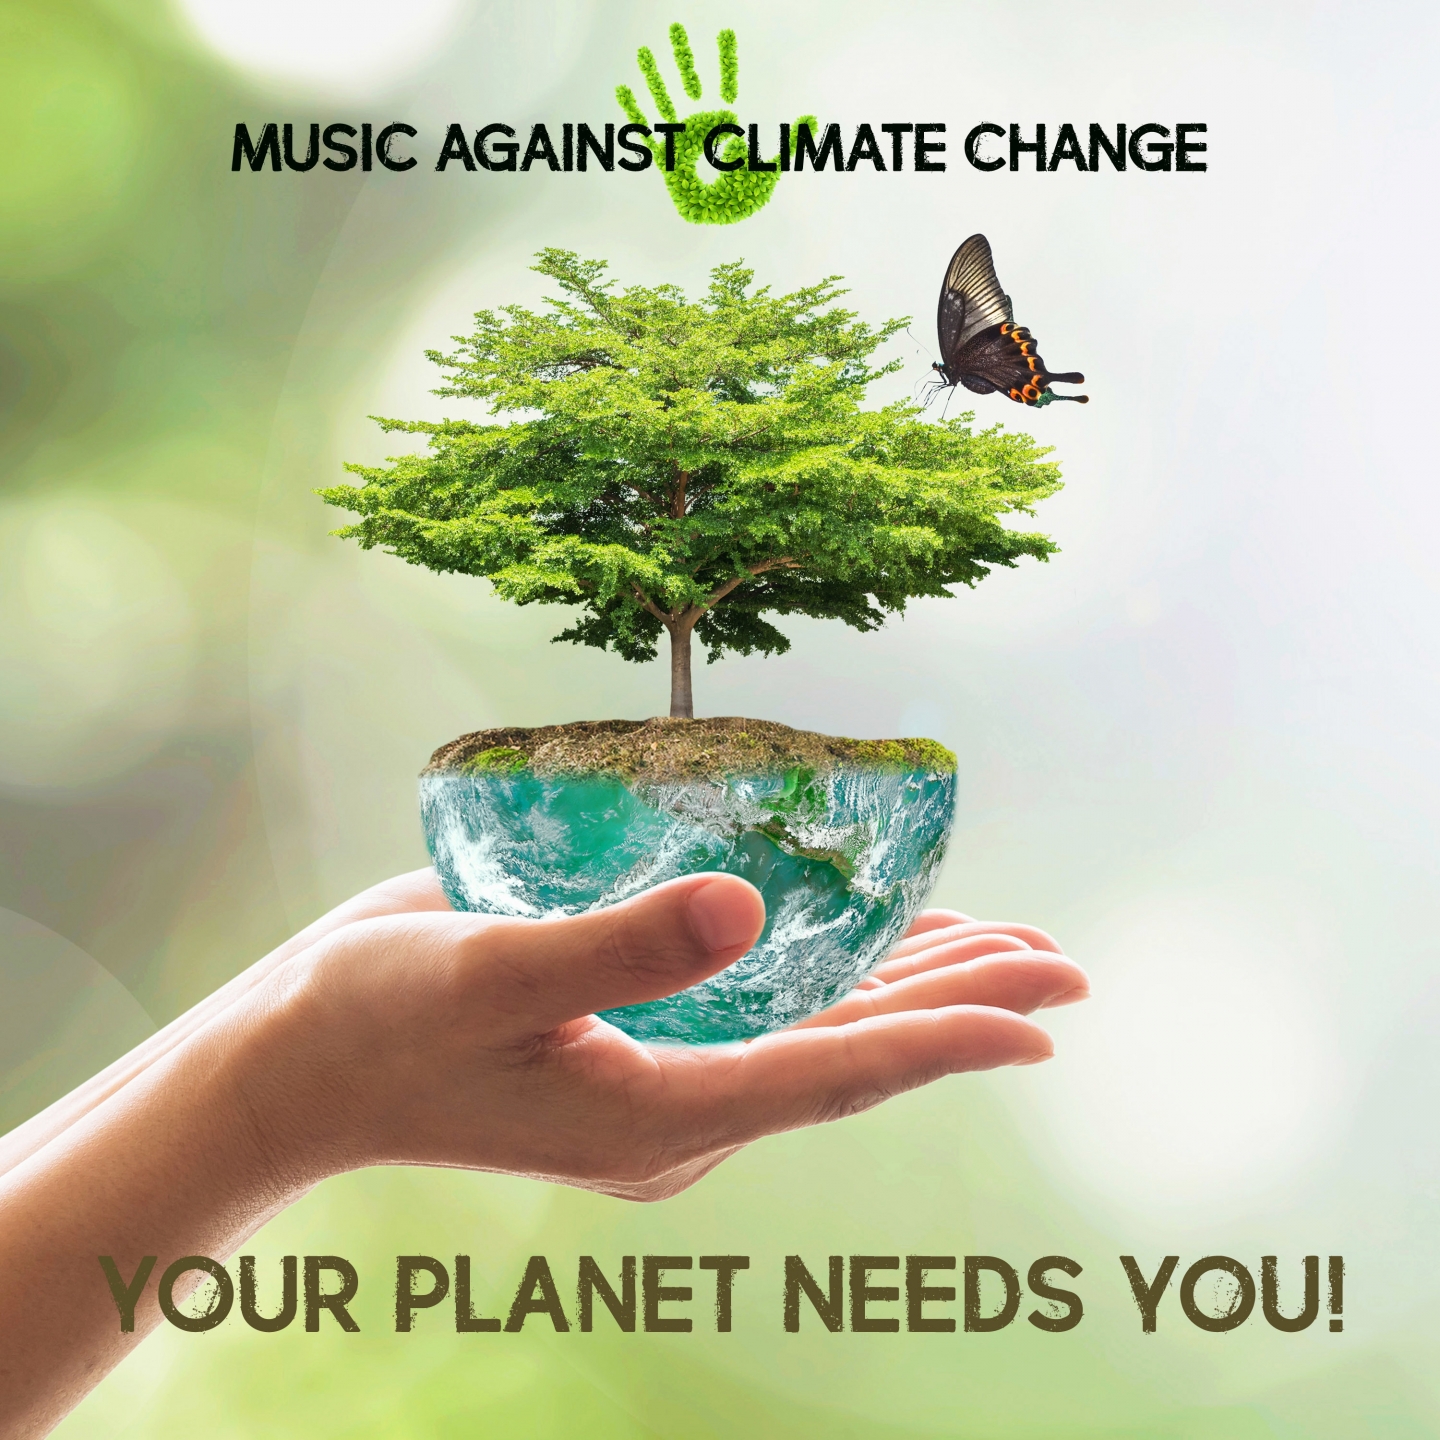 Music Against Climate Change: Your Planet Needs You!